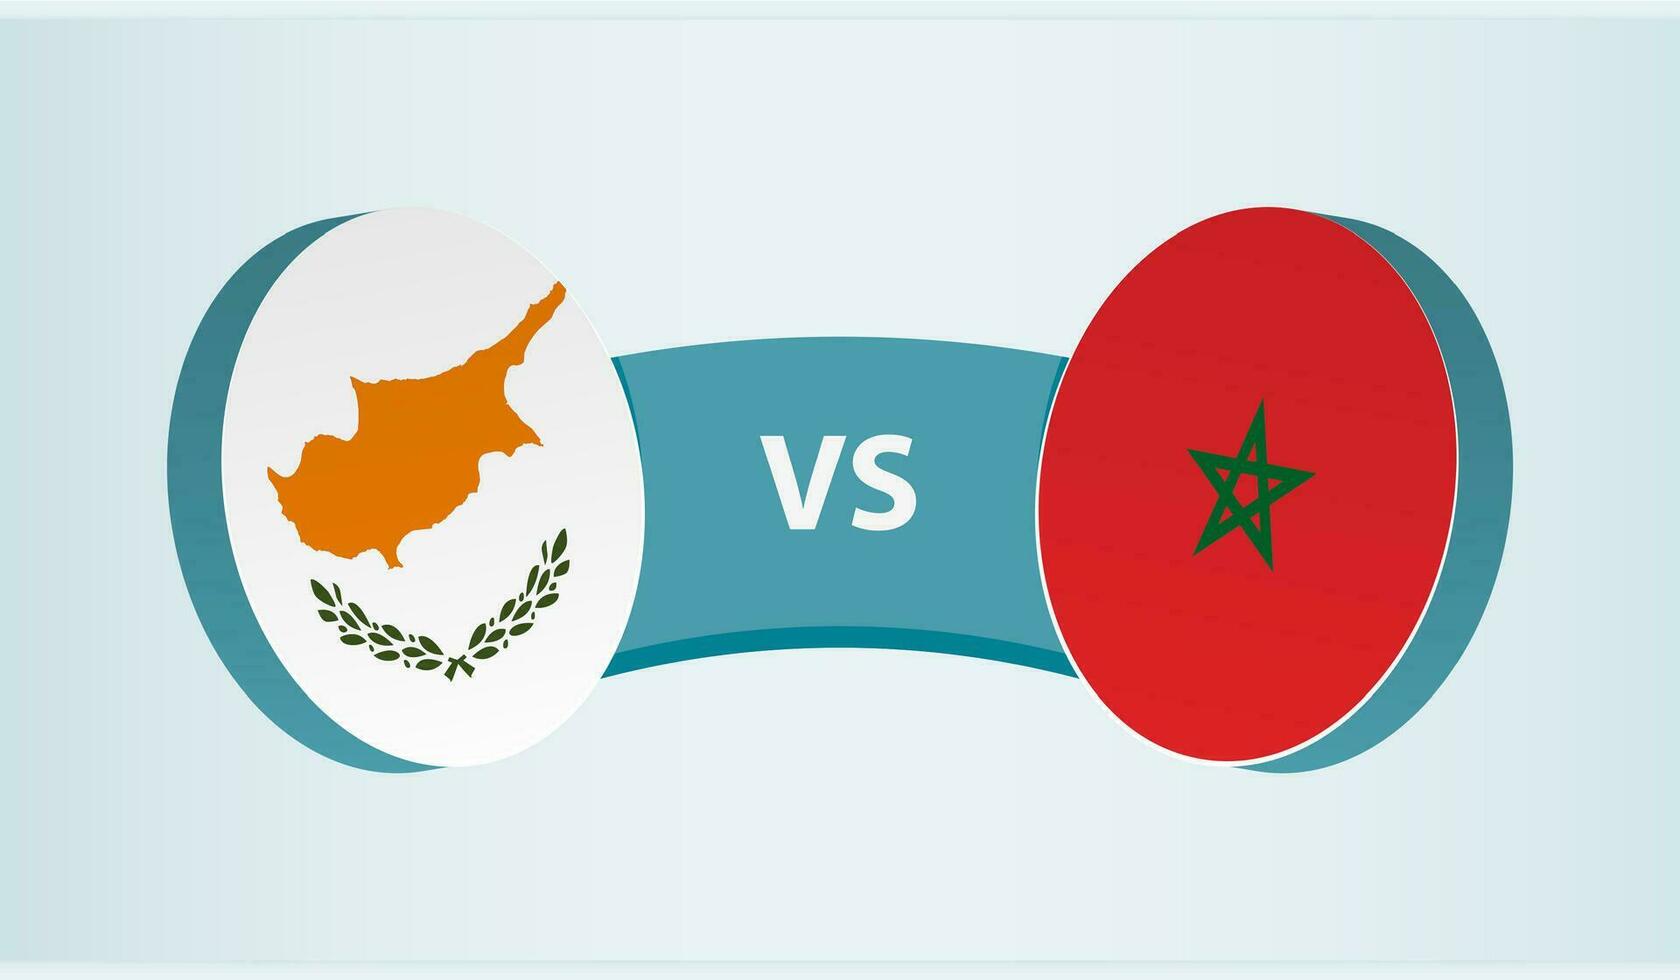 Cyprus versus Morocco, team sports competition concept. vector